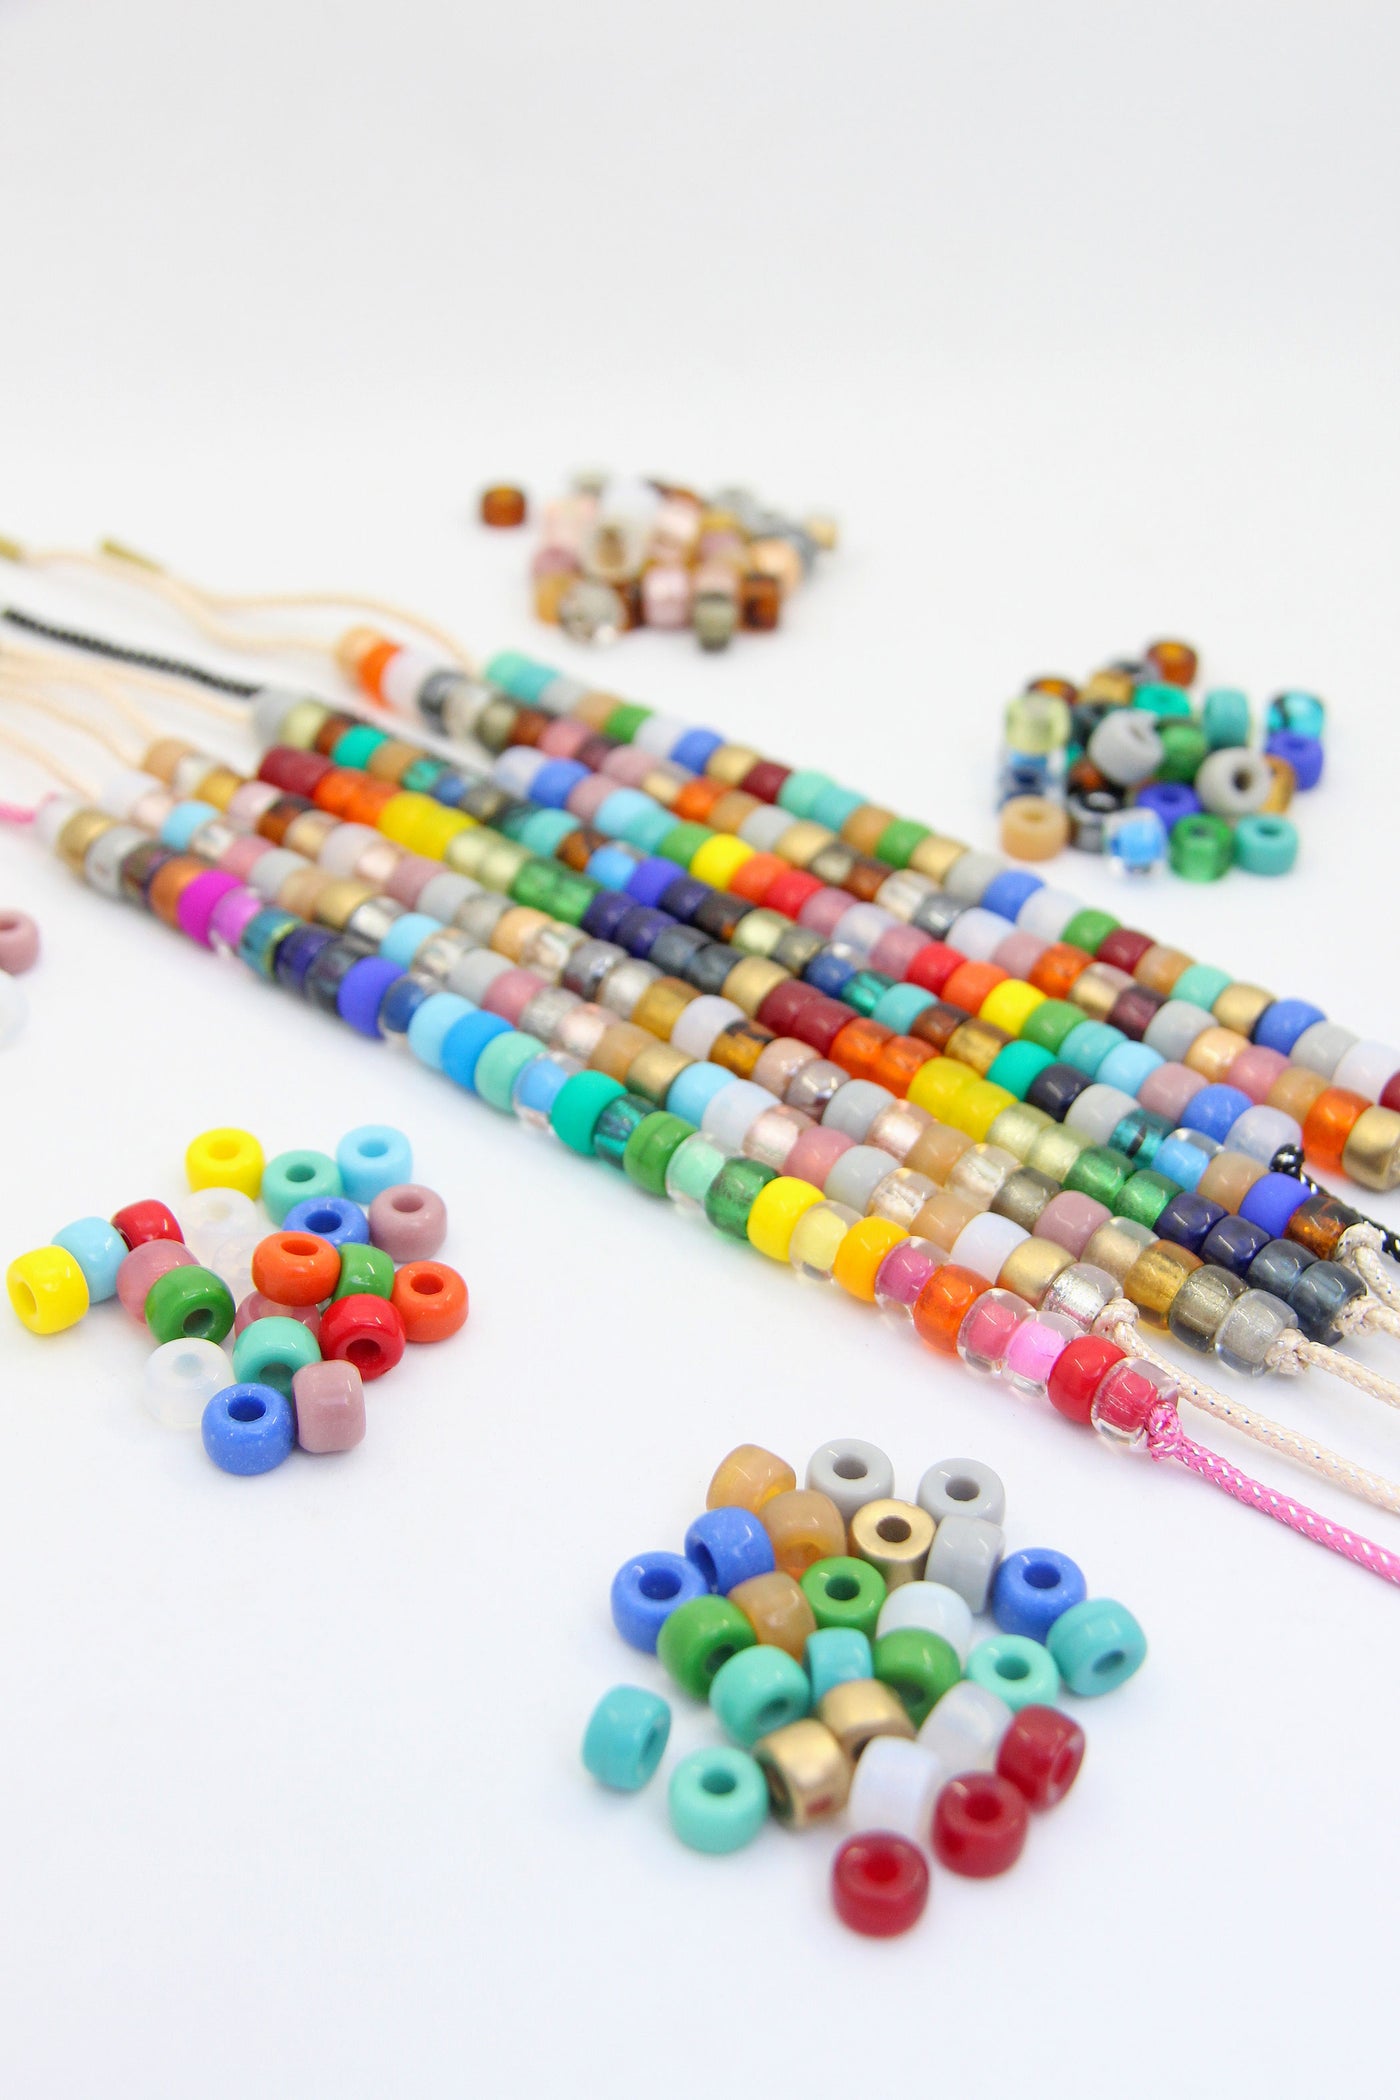 DIY Bead Kit With Over 1700 Beads